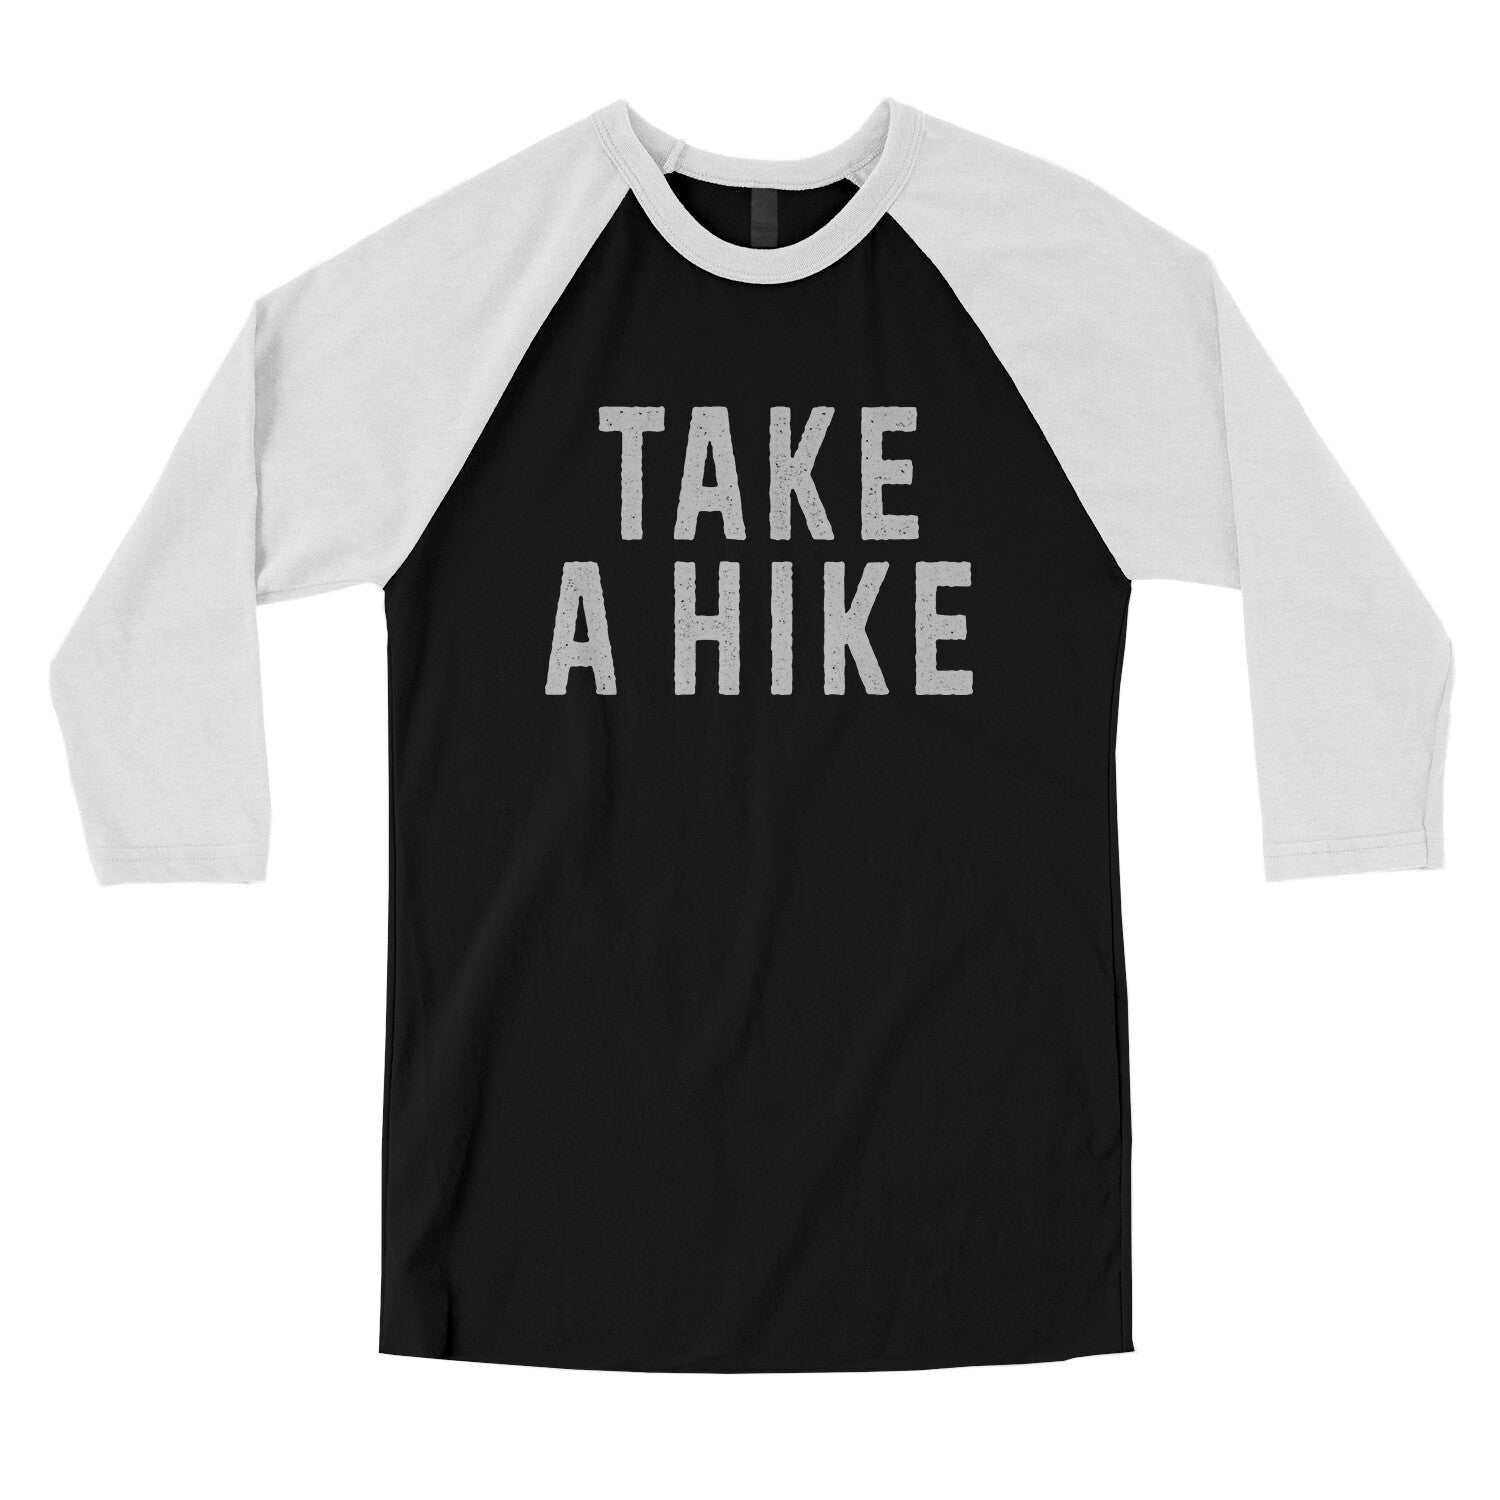 Take a Hike in Black with White Color